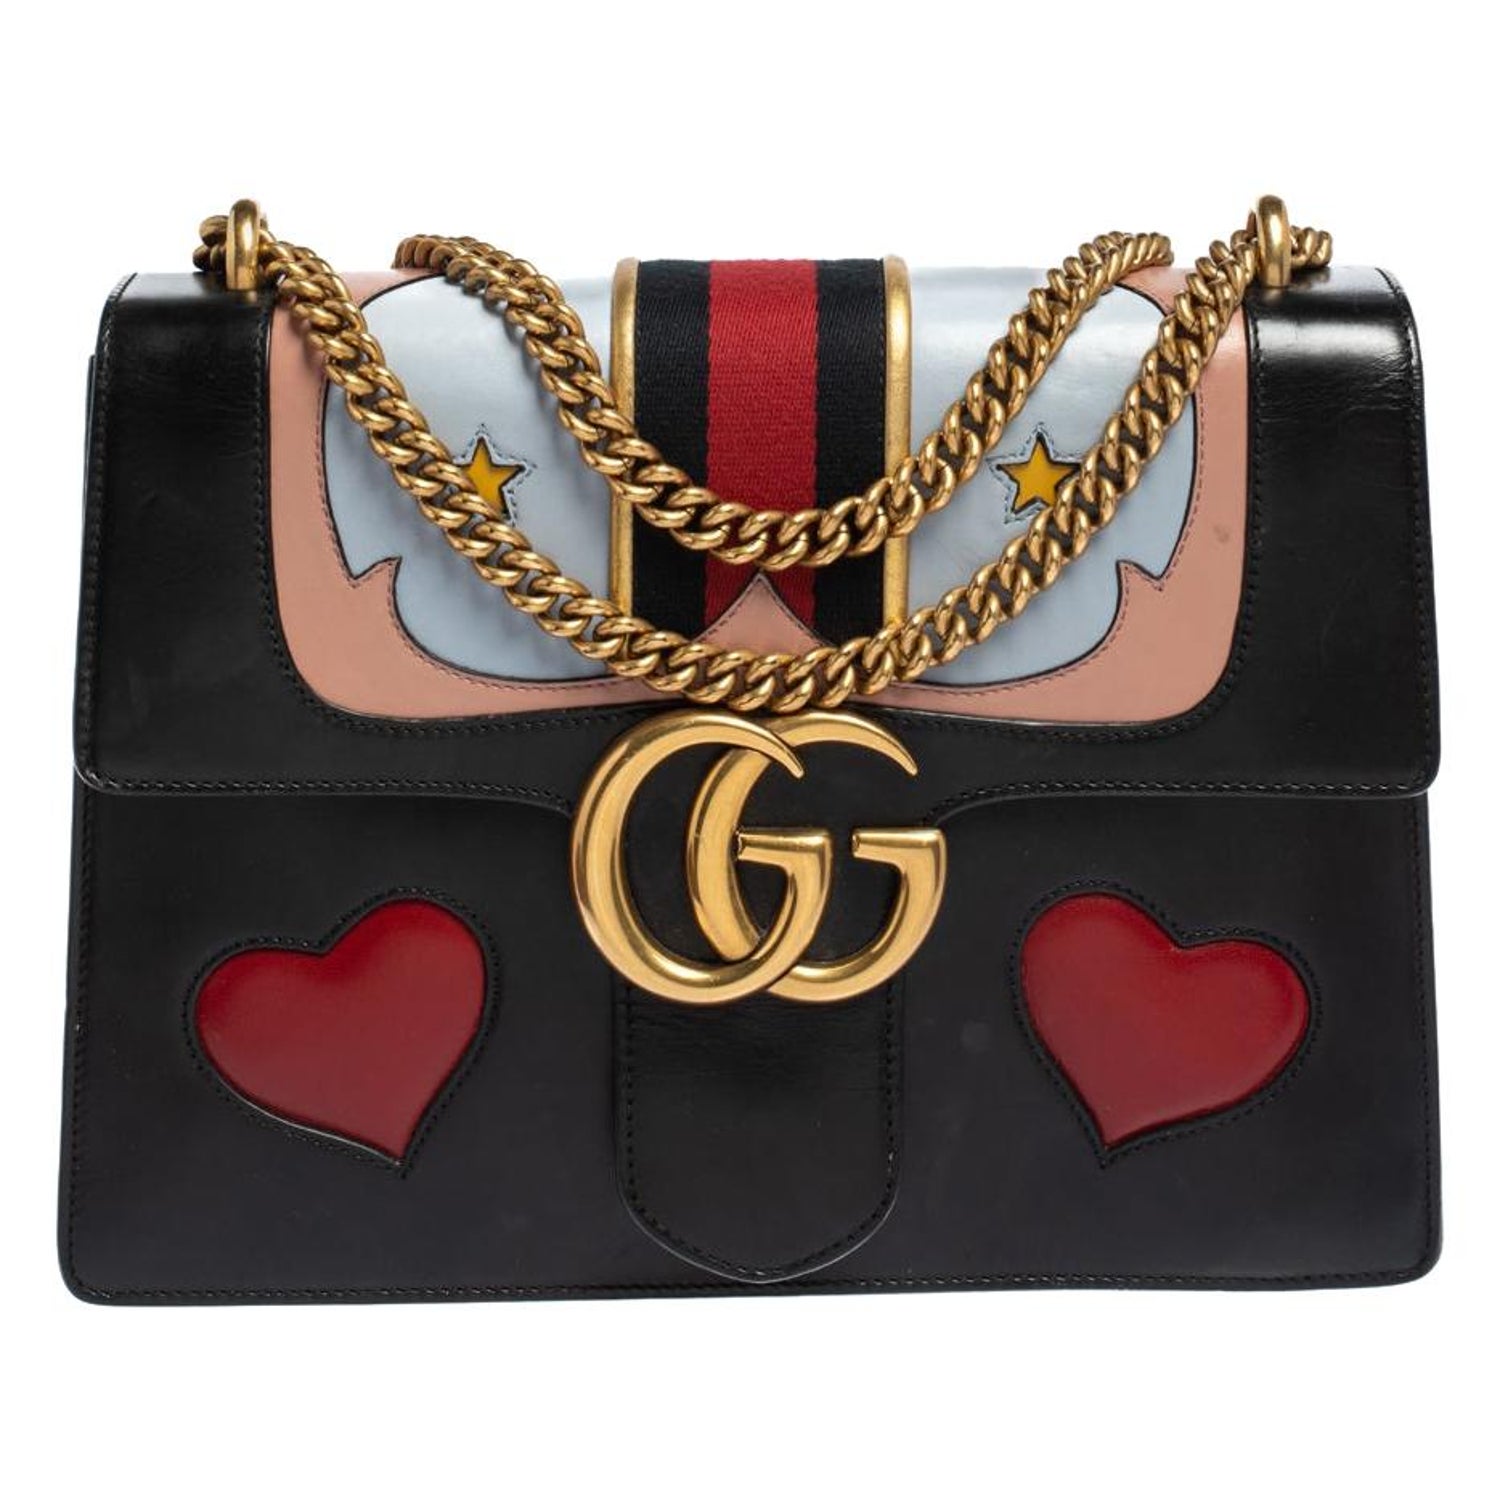 Gucci Heart Bag - 5 For Sale on 1stDibs | gucci heart purse, gucci heart bag  price